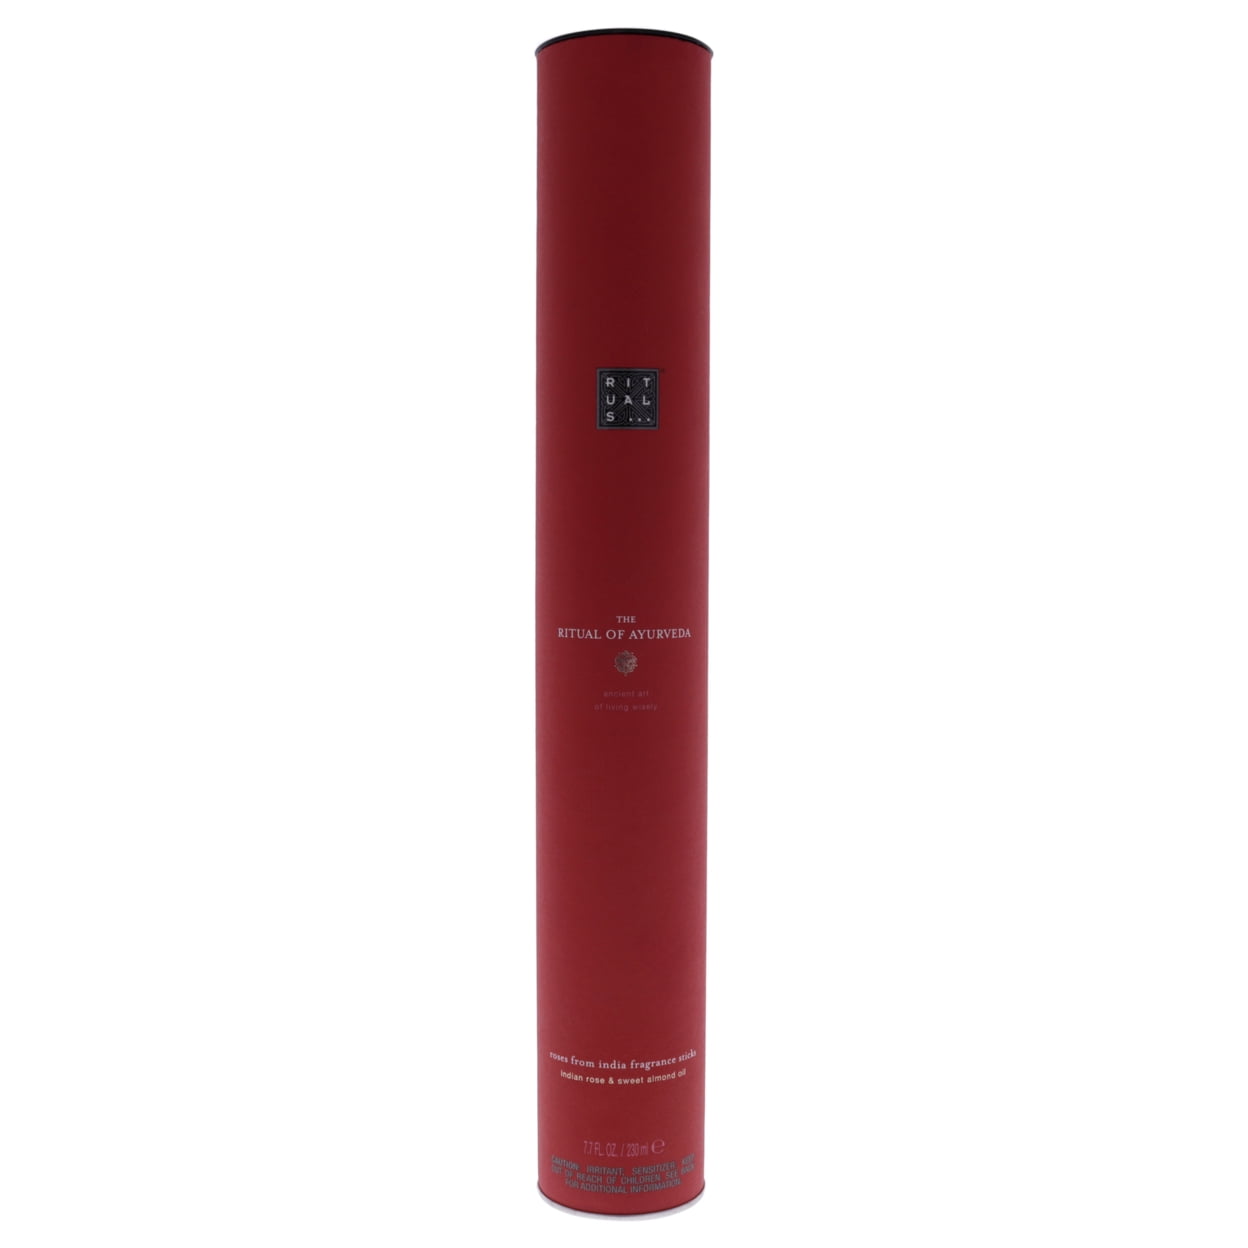 The Ritual of Ayurveda Fragrance Sticks by Rituals for Unisex - 7.7 oz  Diffuser 